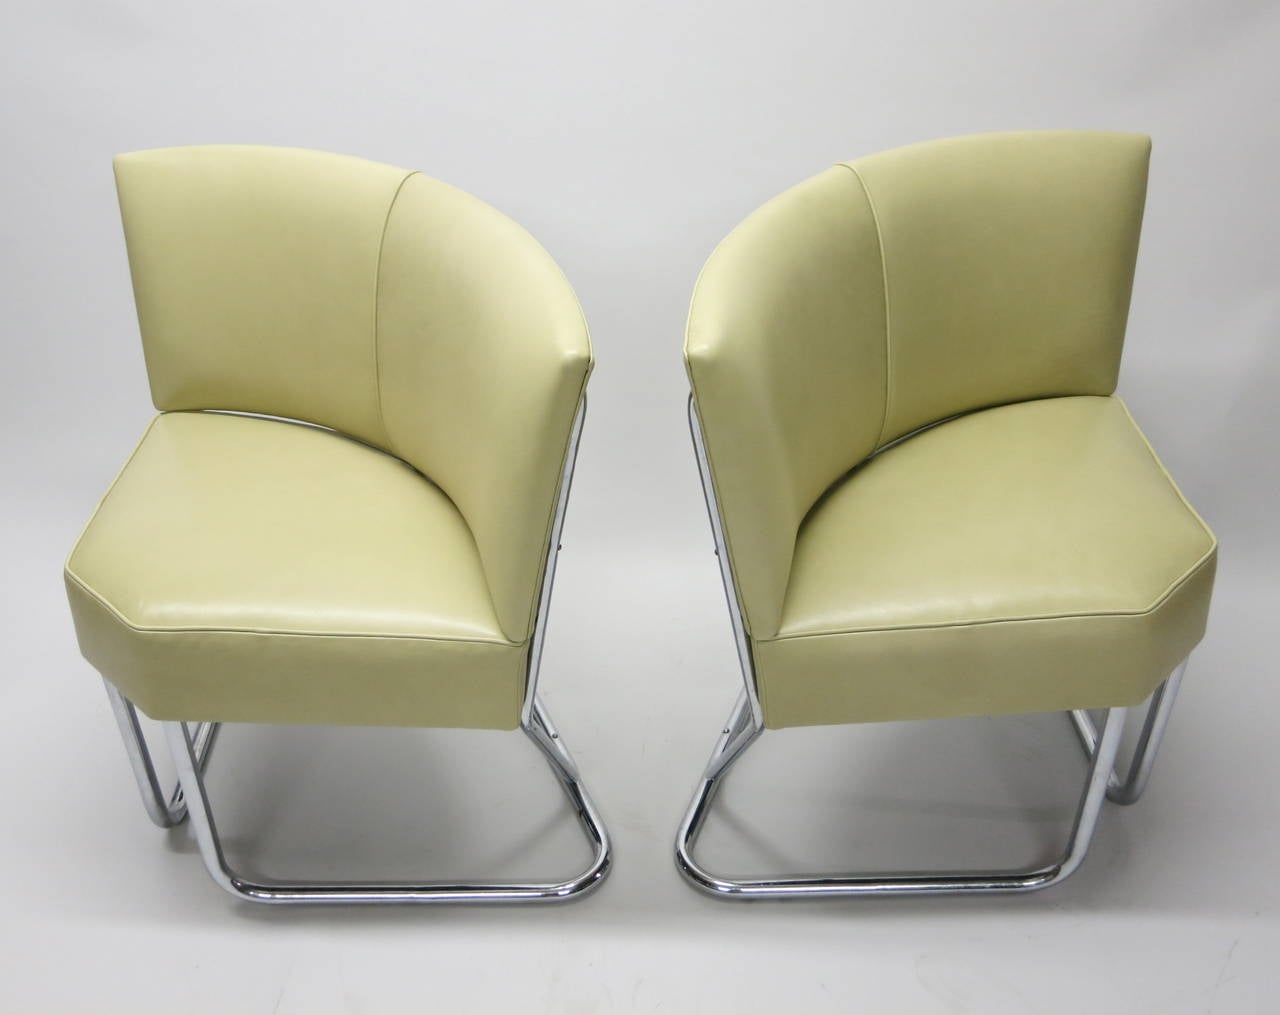 American Pair or Arched Back Chairs by Thonet, USA Circa 1940